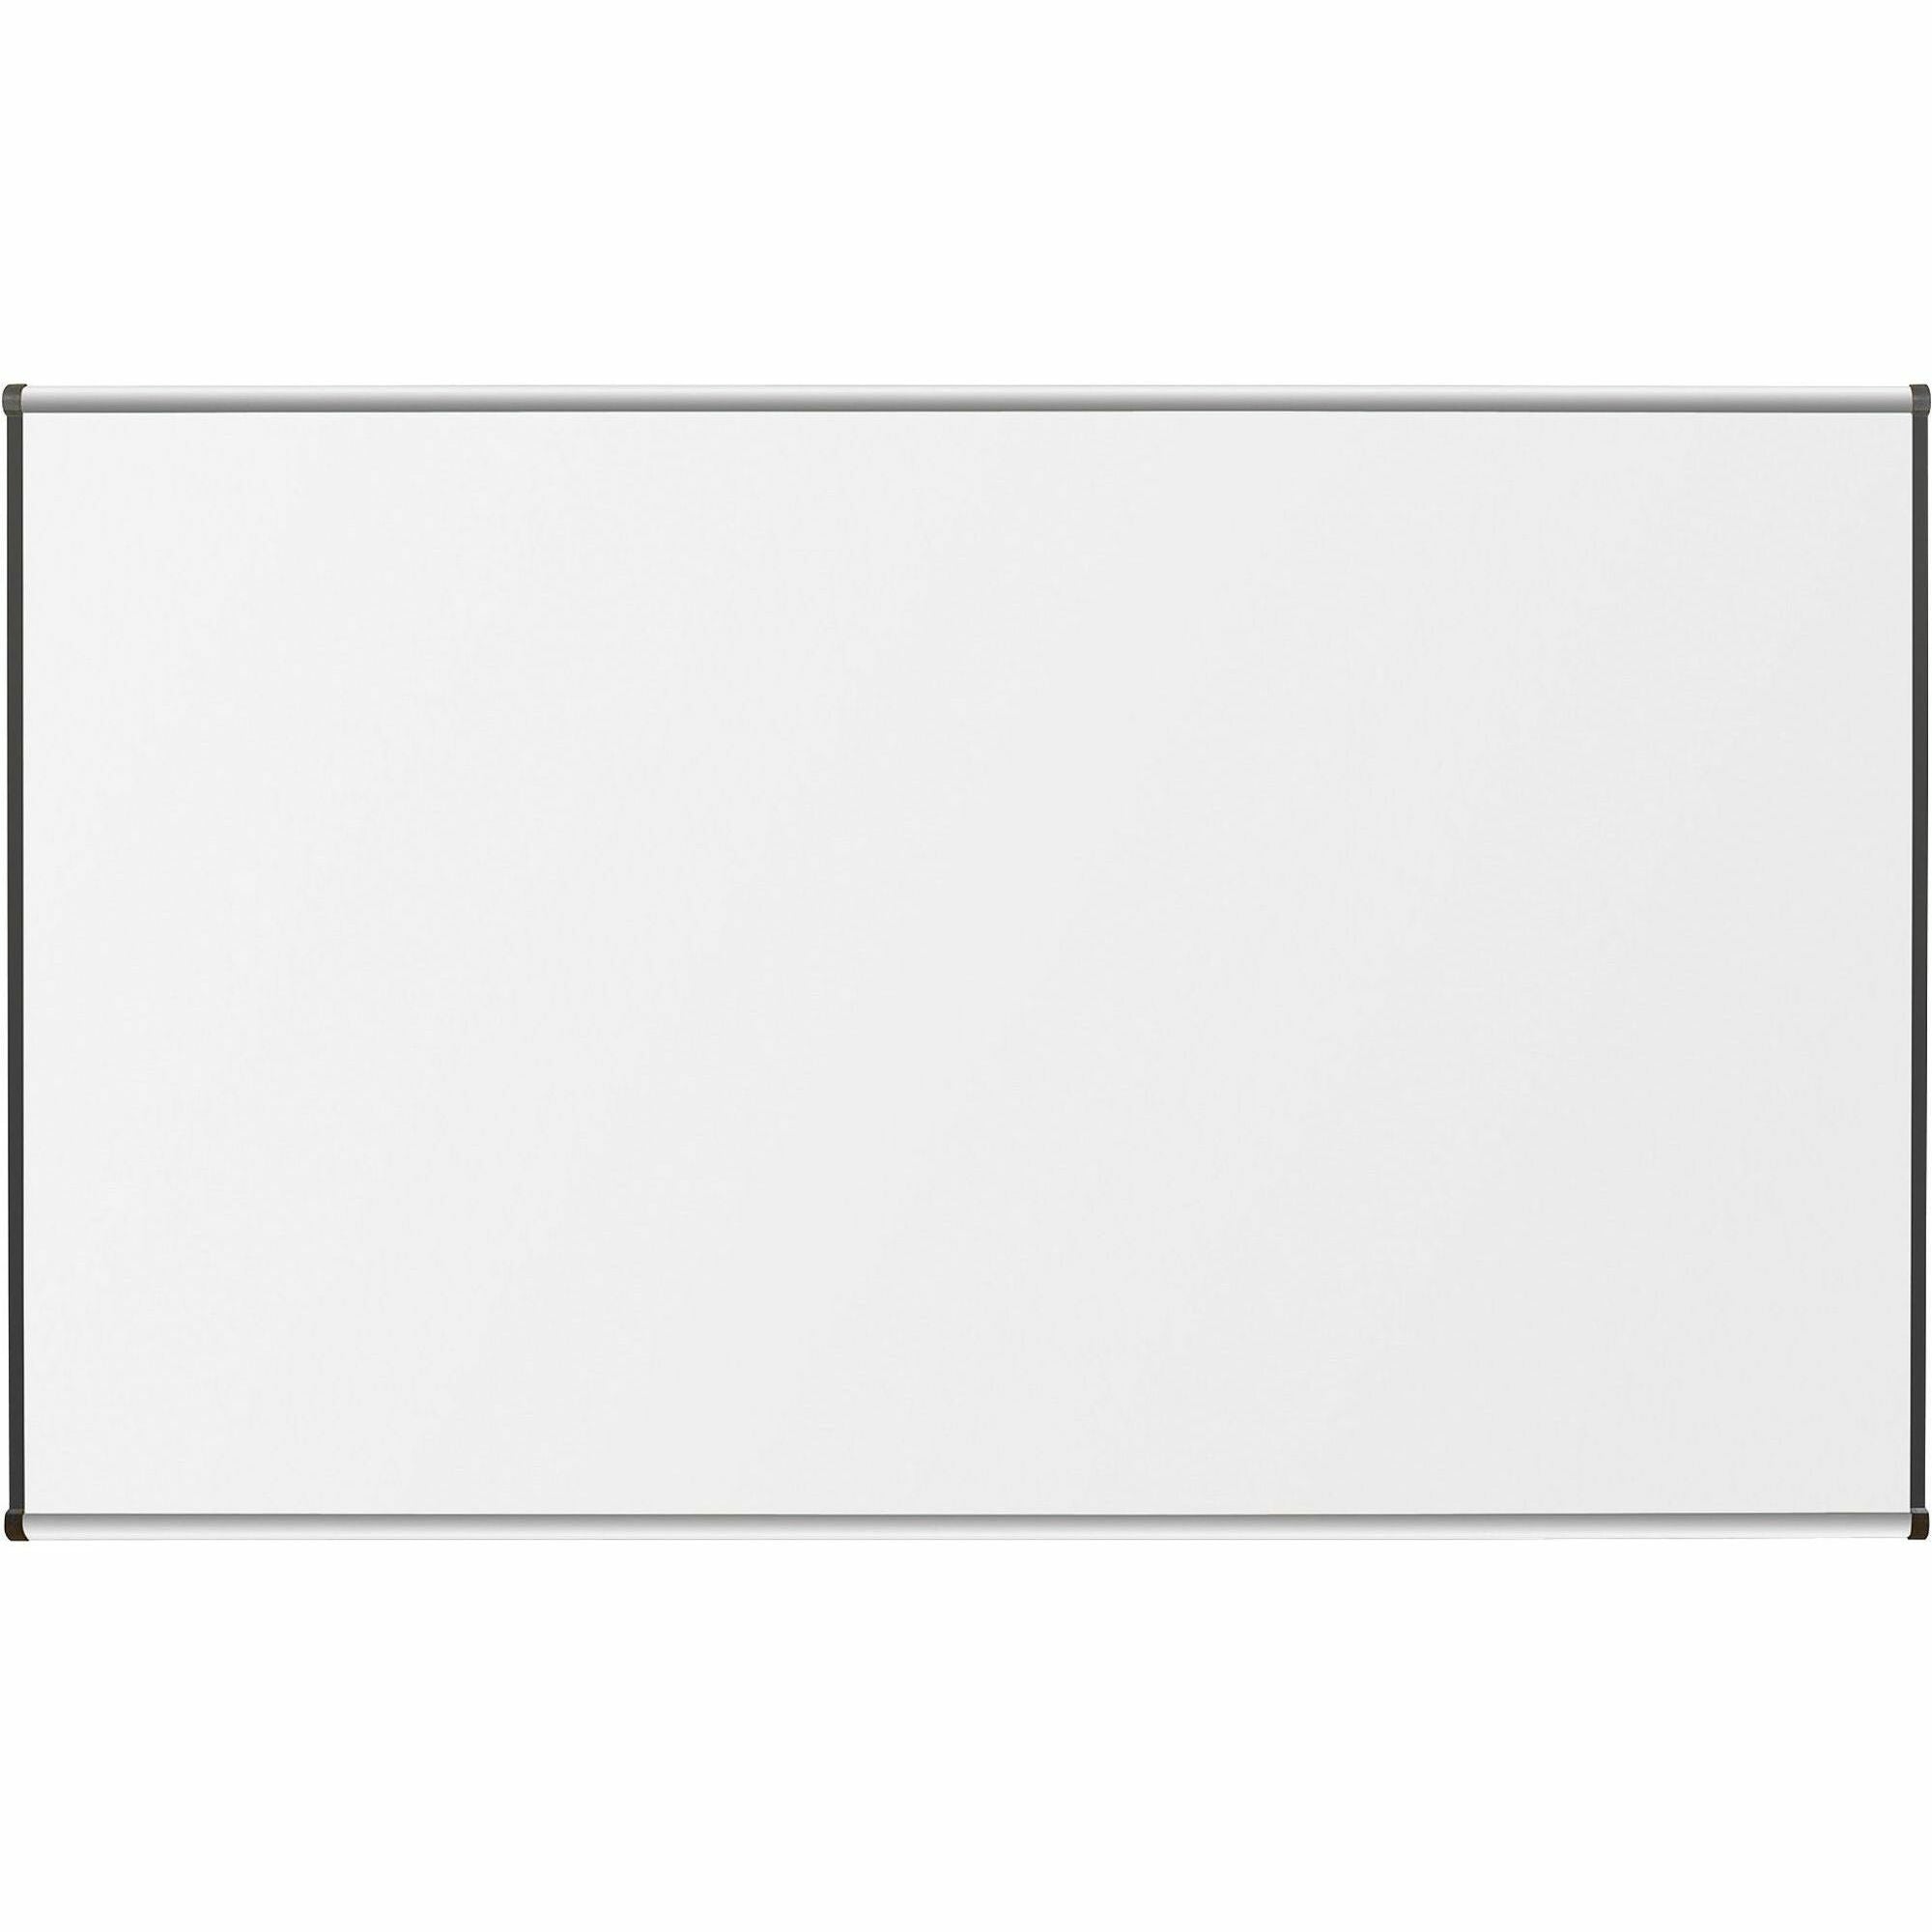 Lorell Dry-Erase Marker Board - 72" (6 ft) Width x 48" (4 ft) Height - Porcelain Enameled Steel Surface - Satin Aluminum Frame - Magnetic - Ghost Resistant - Assembly Required - 1 Each - 